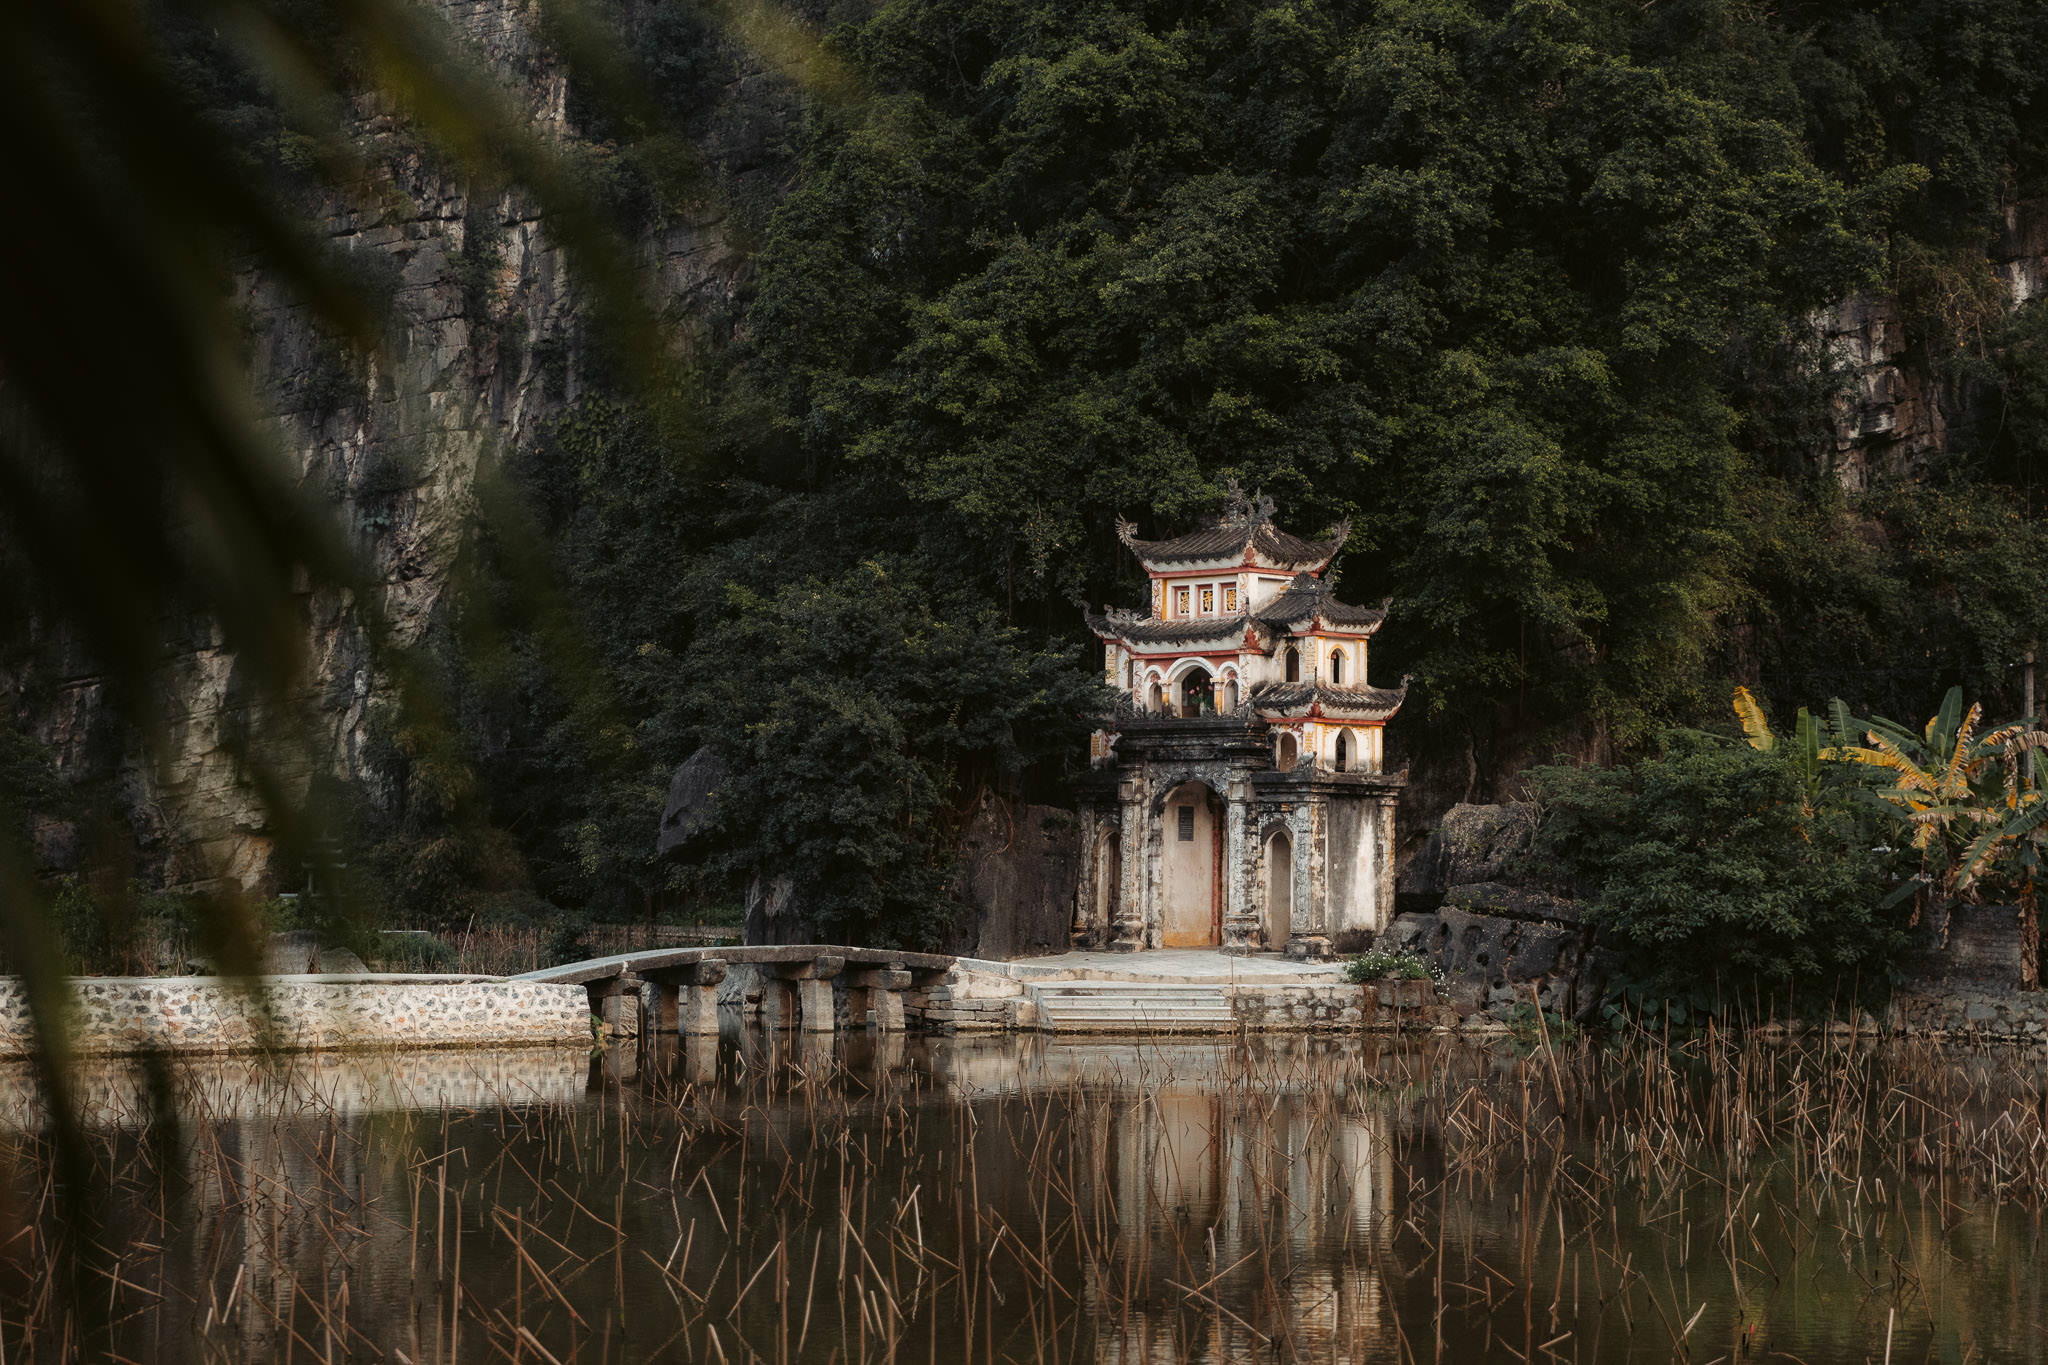 Bich Dong Pagoda in Ninh Binh Vietnam is a great thing to visit and see the hidden temple.